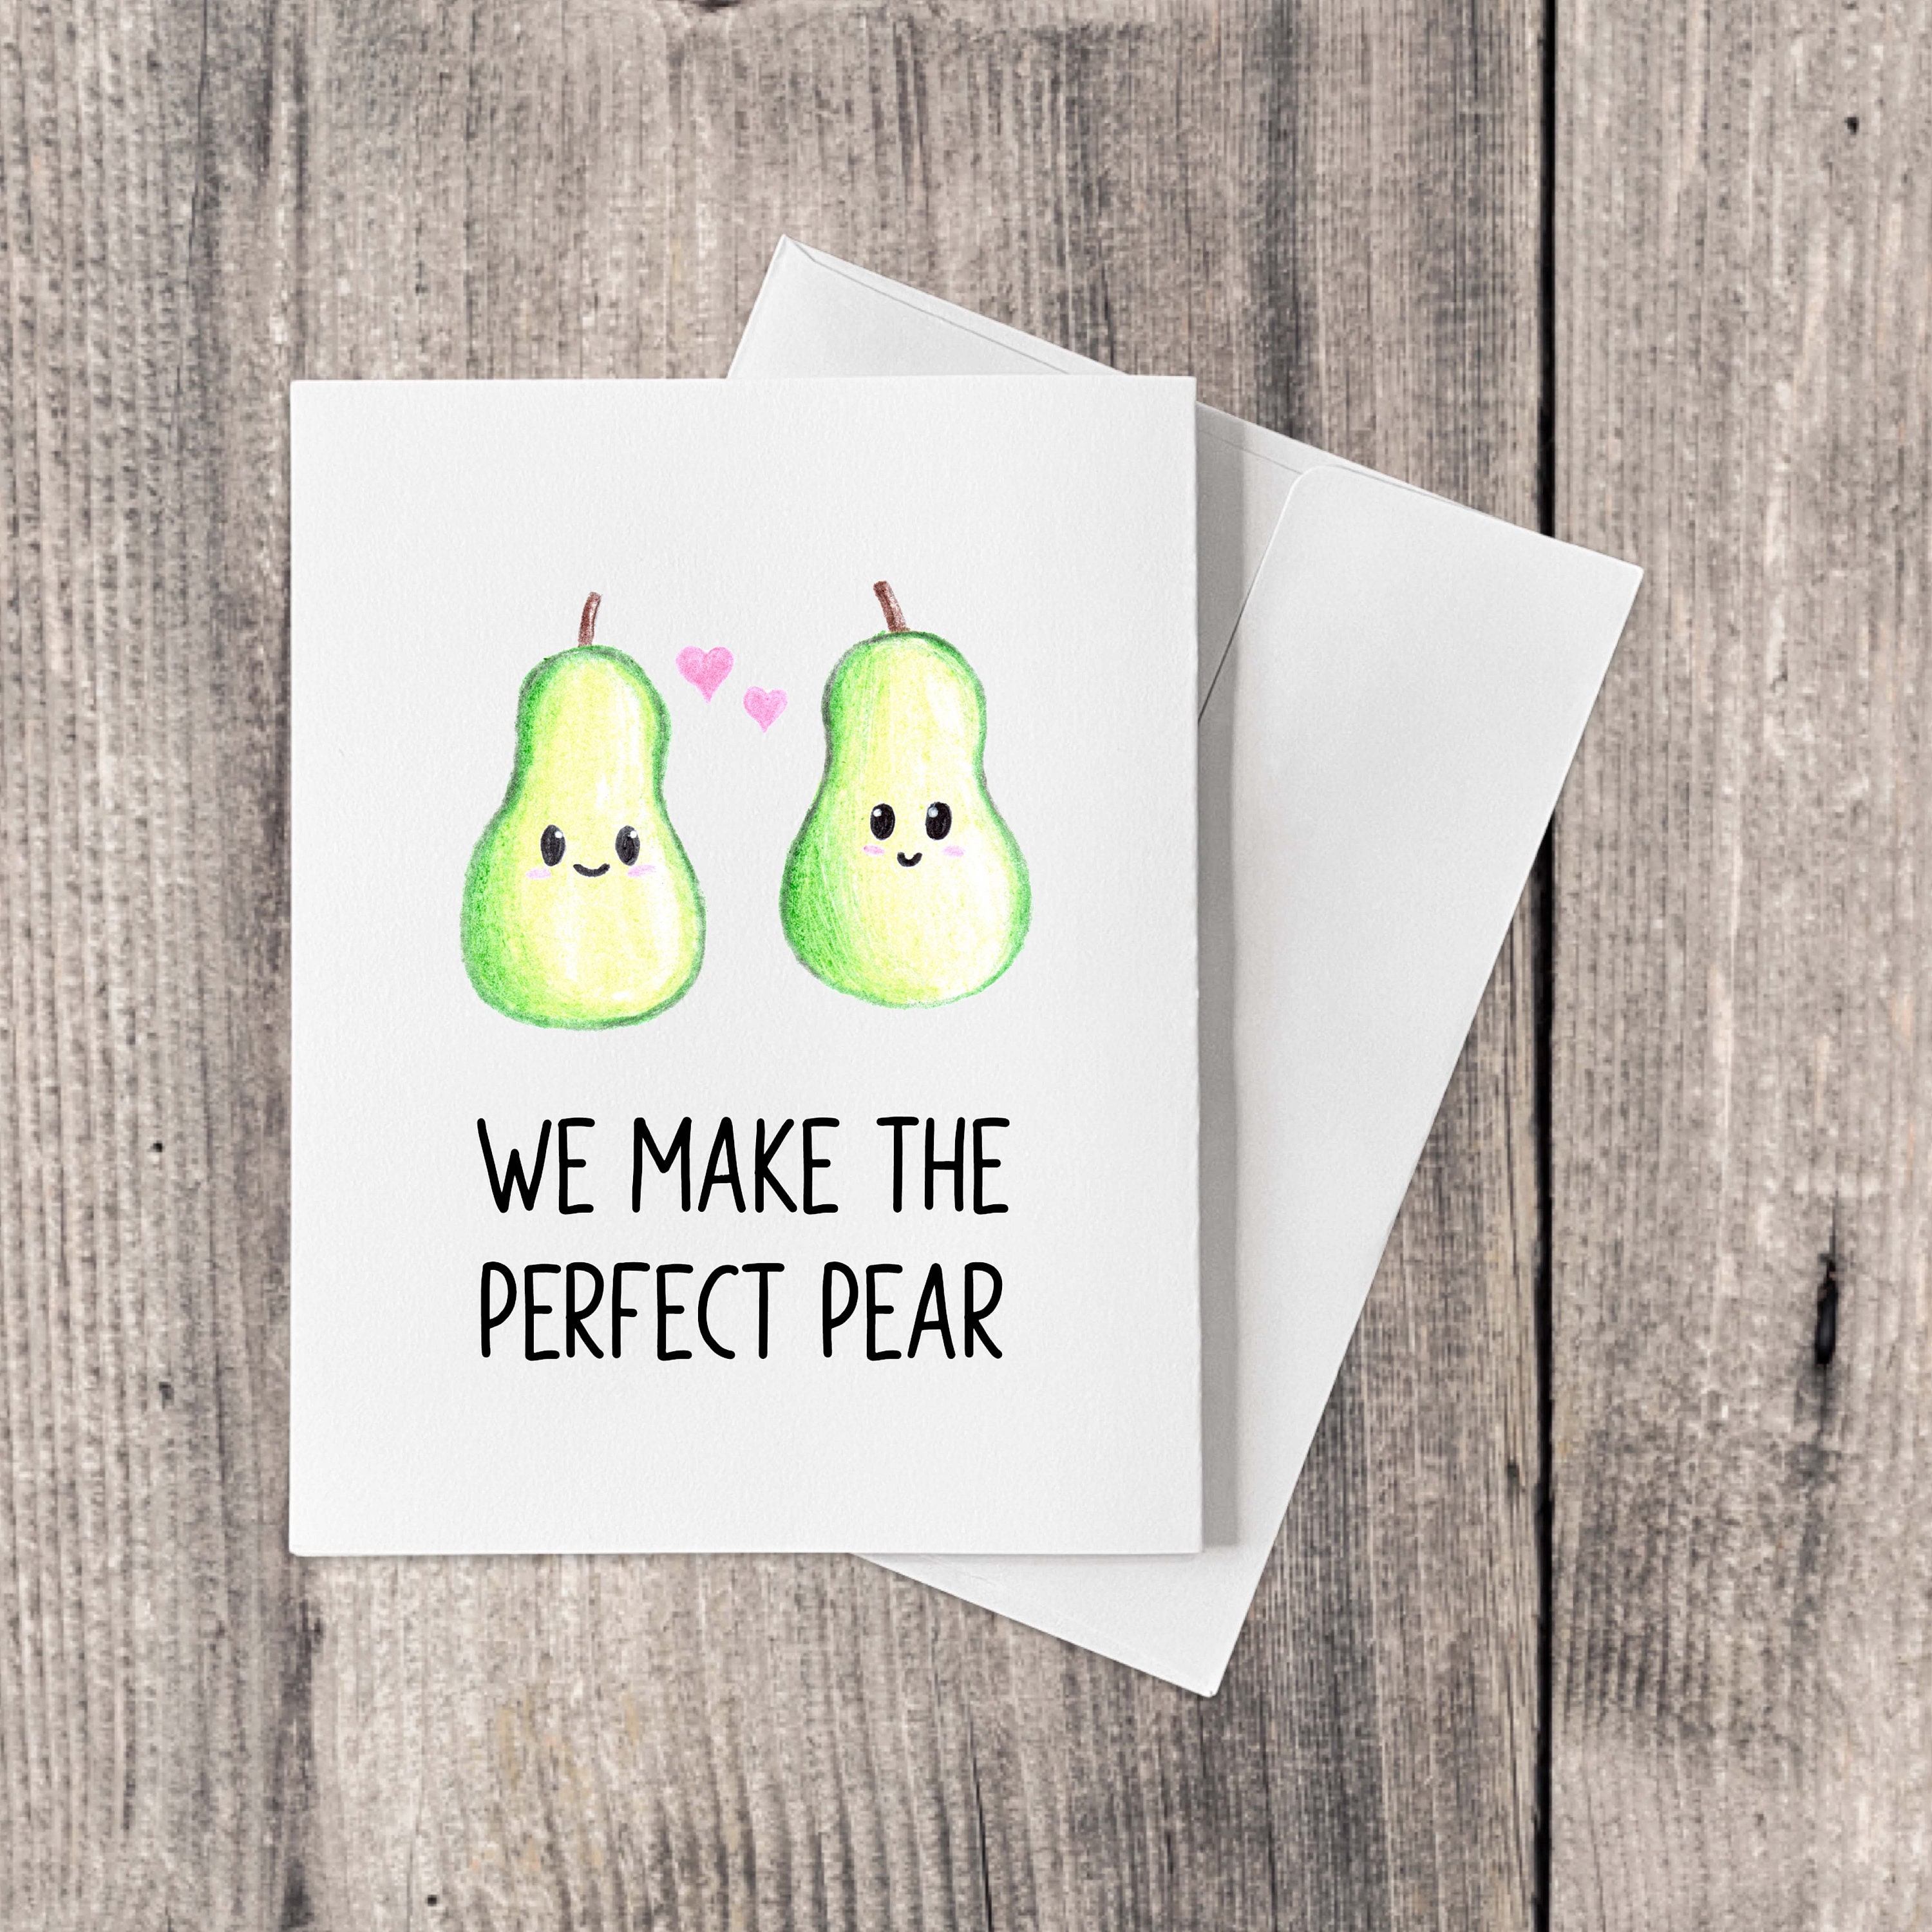 Cute Pear Anniversary / Valentines Day Card Pun We Make the Perfect Pear -   Canada